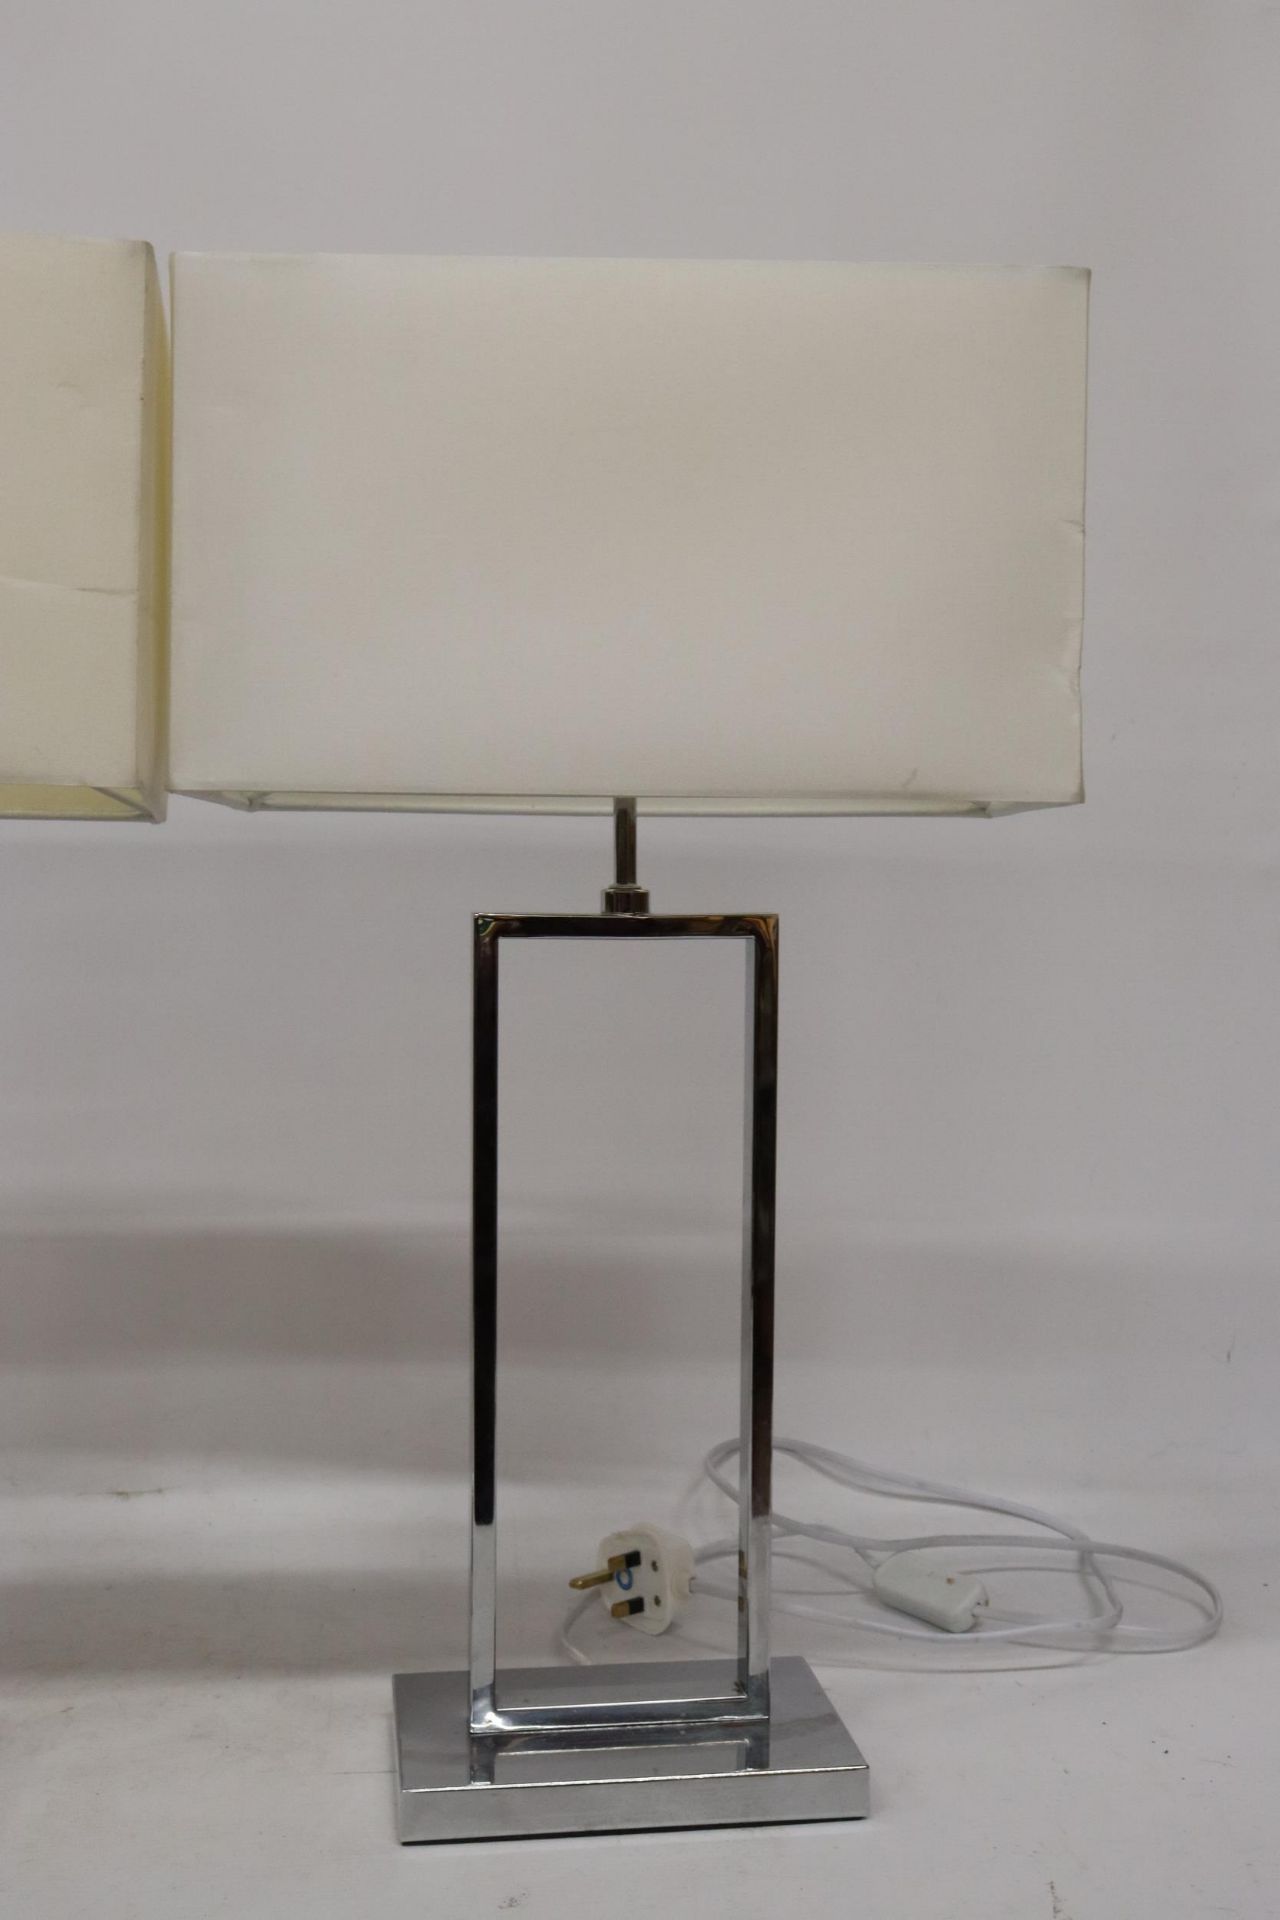 A PAIR OF MODERN CHROME TABLE LAMPS WITH SHADES, HEIGHT 58CM - Image 3 of 6